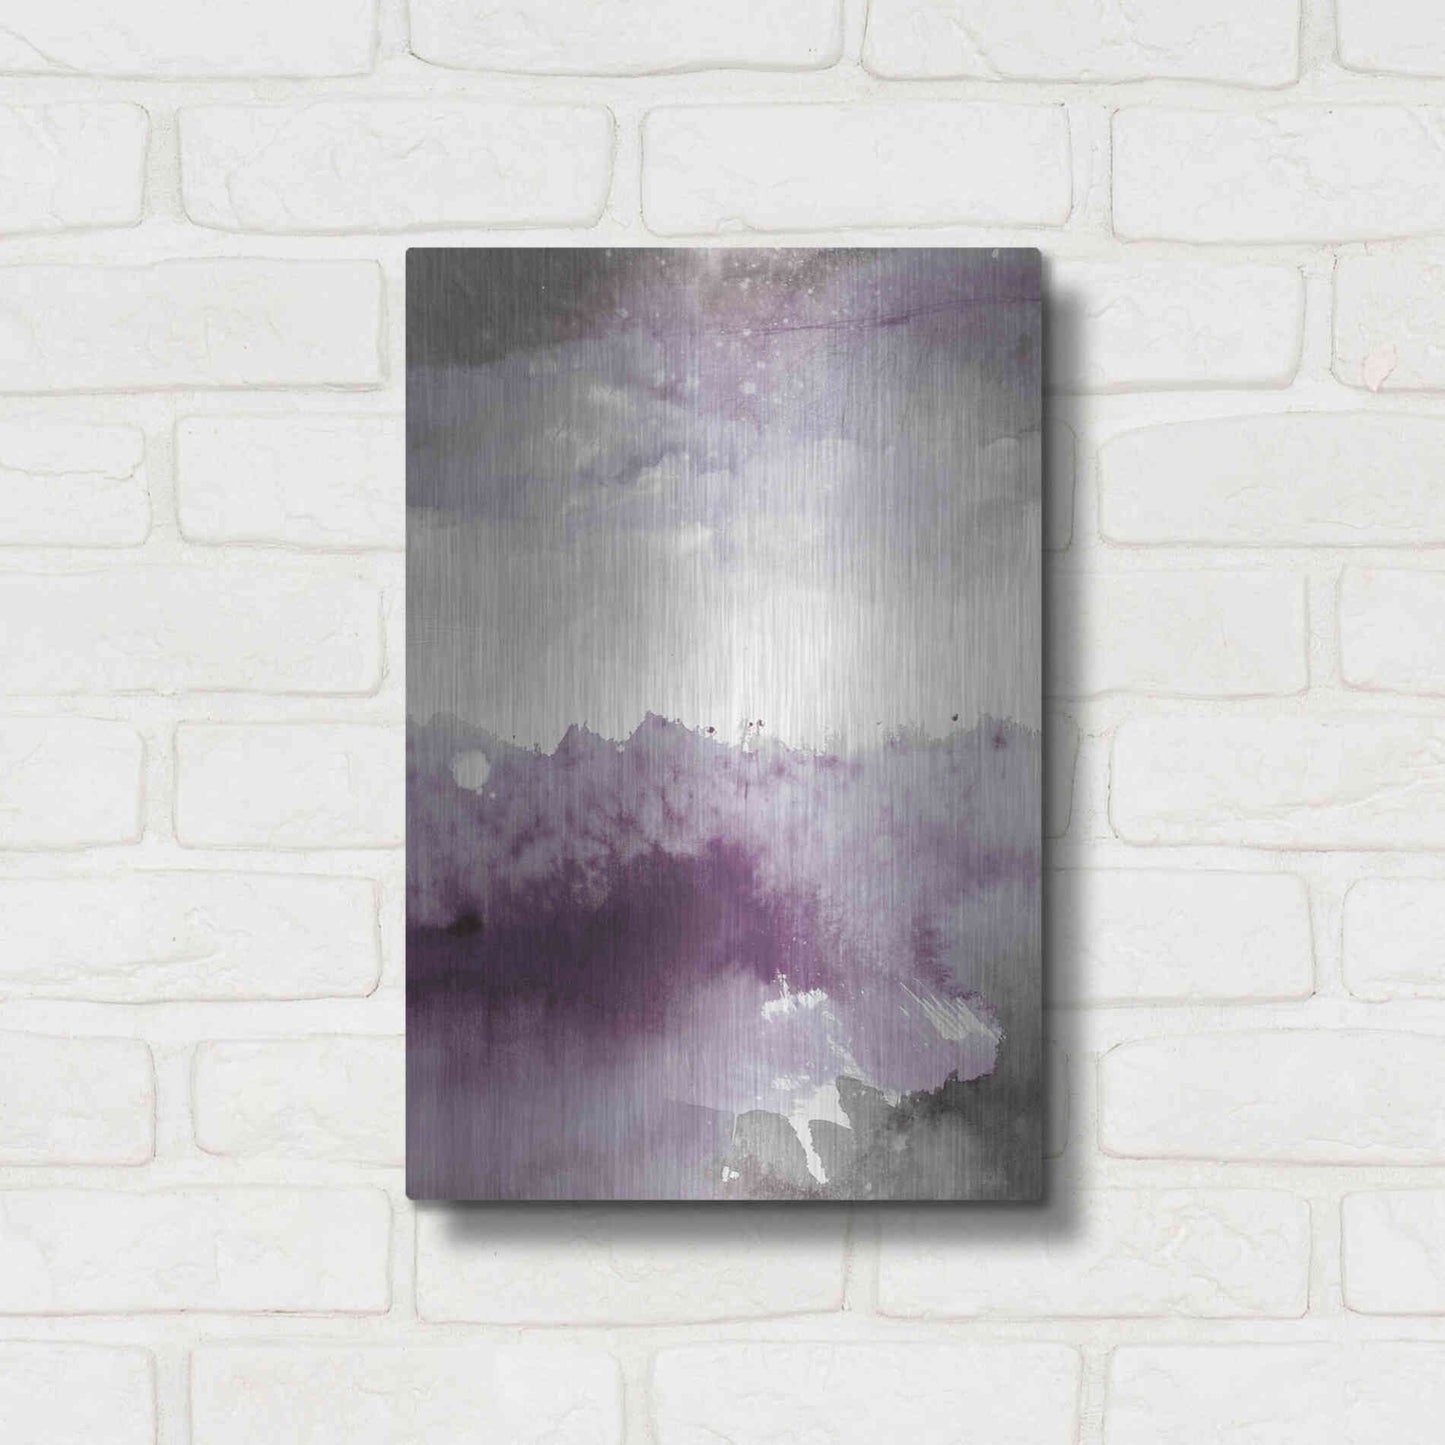 Luxe Metal Art 'Midnight At The Lake II Amethyst Gray Crop' by Mike Schick, Metal Wall Art,12x16